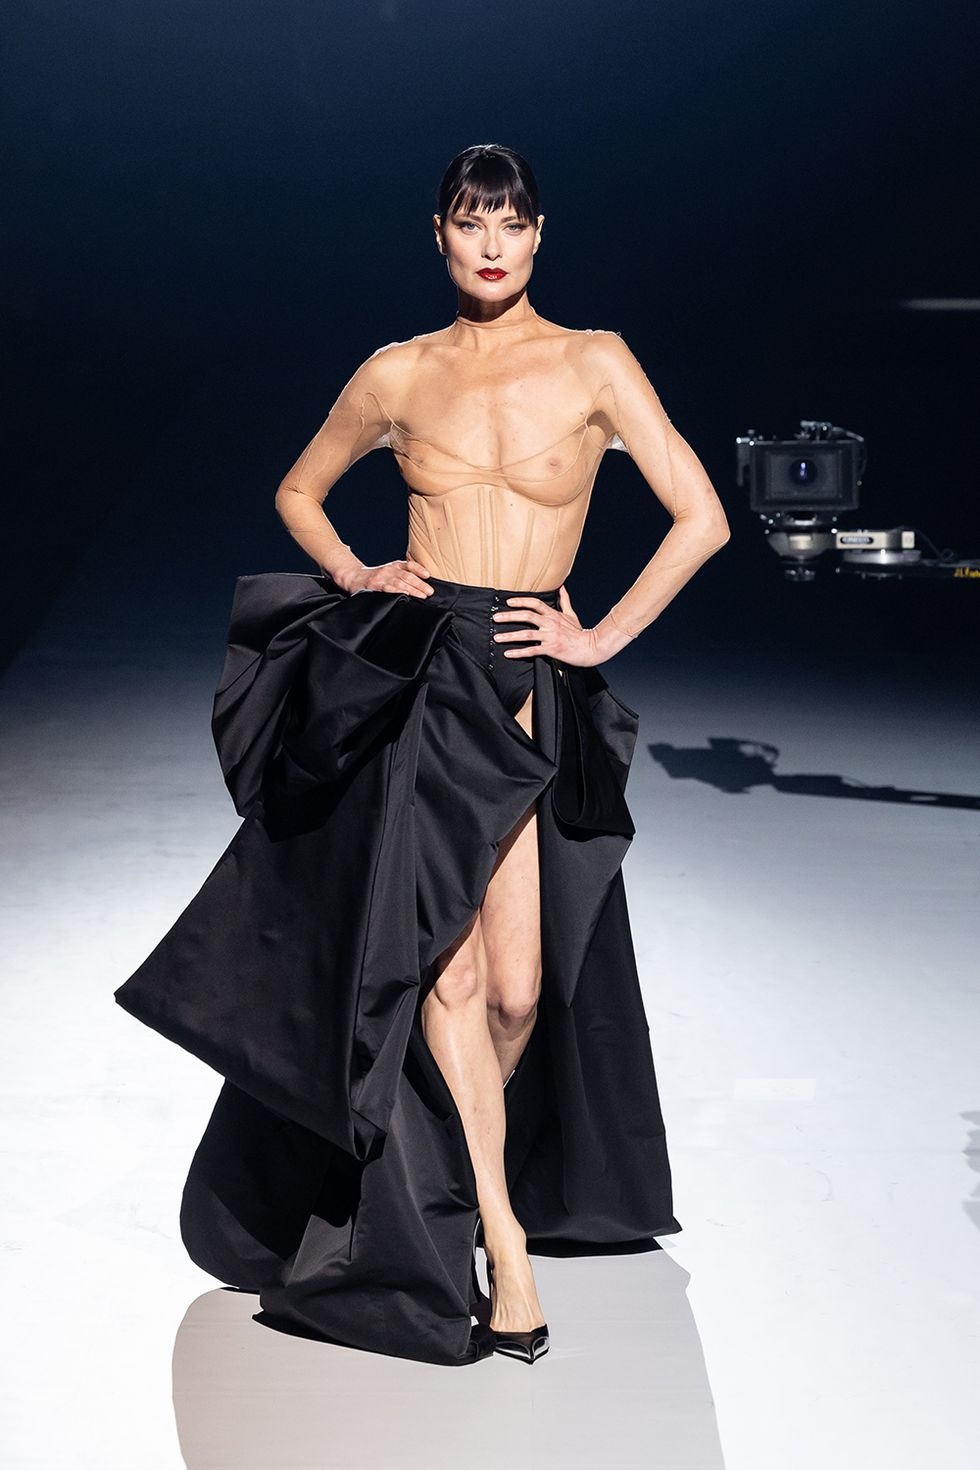 paris, france january 26 editorial use only for non editorial use please seek approval from fashion house editors note image contains nudity shalom harlow walks the runway during the thierry mugler haute couture spring summer 2023 show as part of paris fashion week on january 26, 2023 in paris, france photo by victor boykogetty images